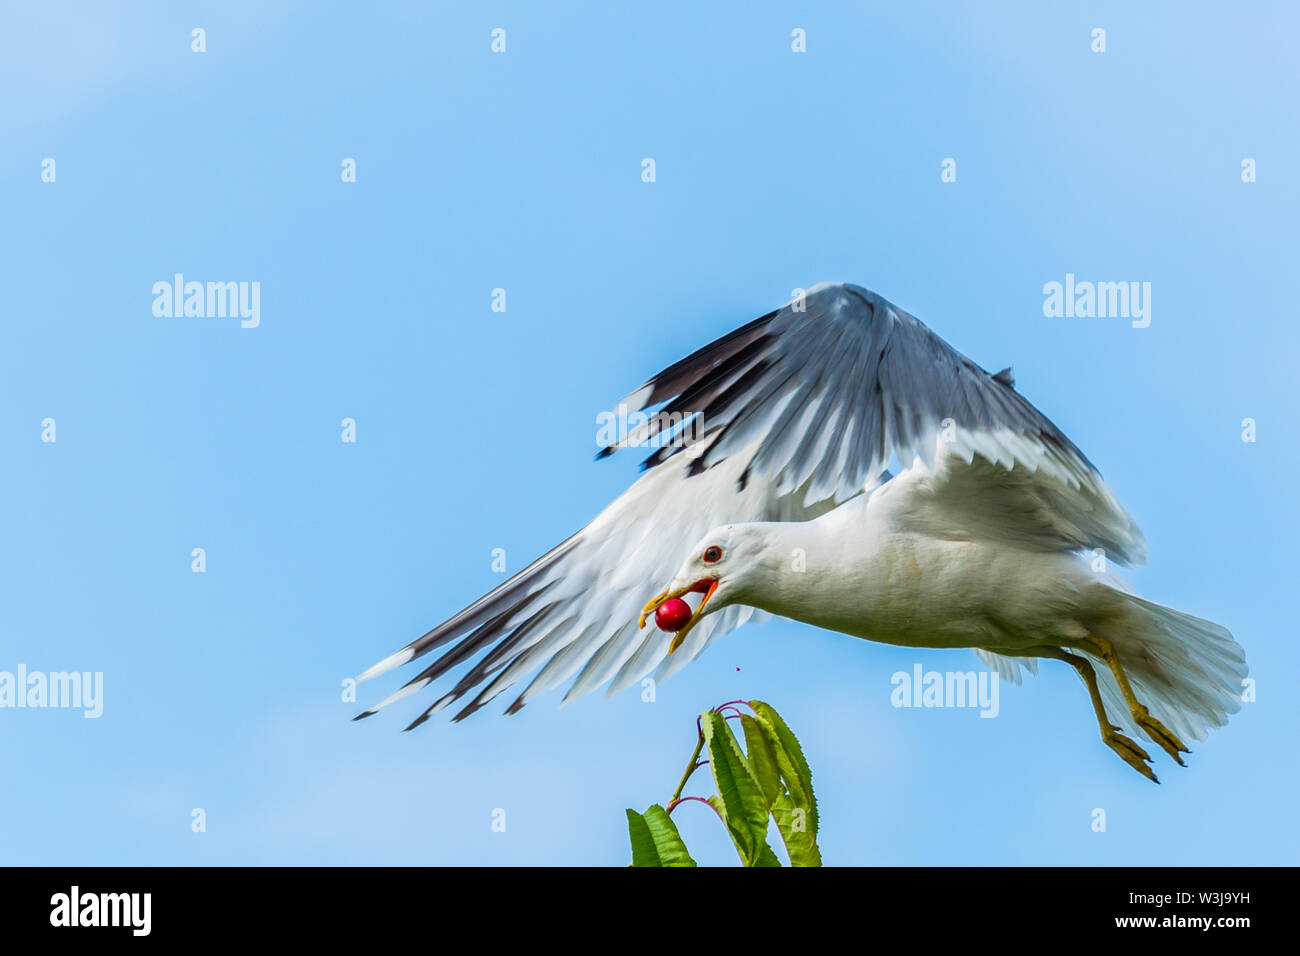 A seagull gets a cherry in flight from a cherry tree Stock Photo